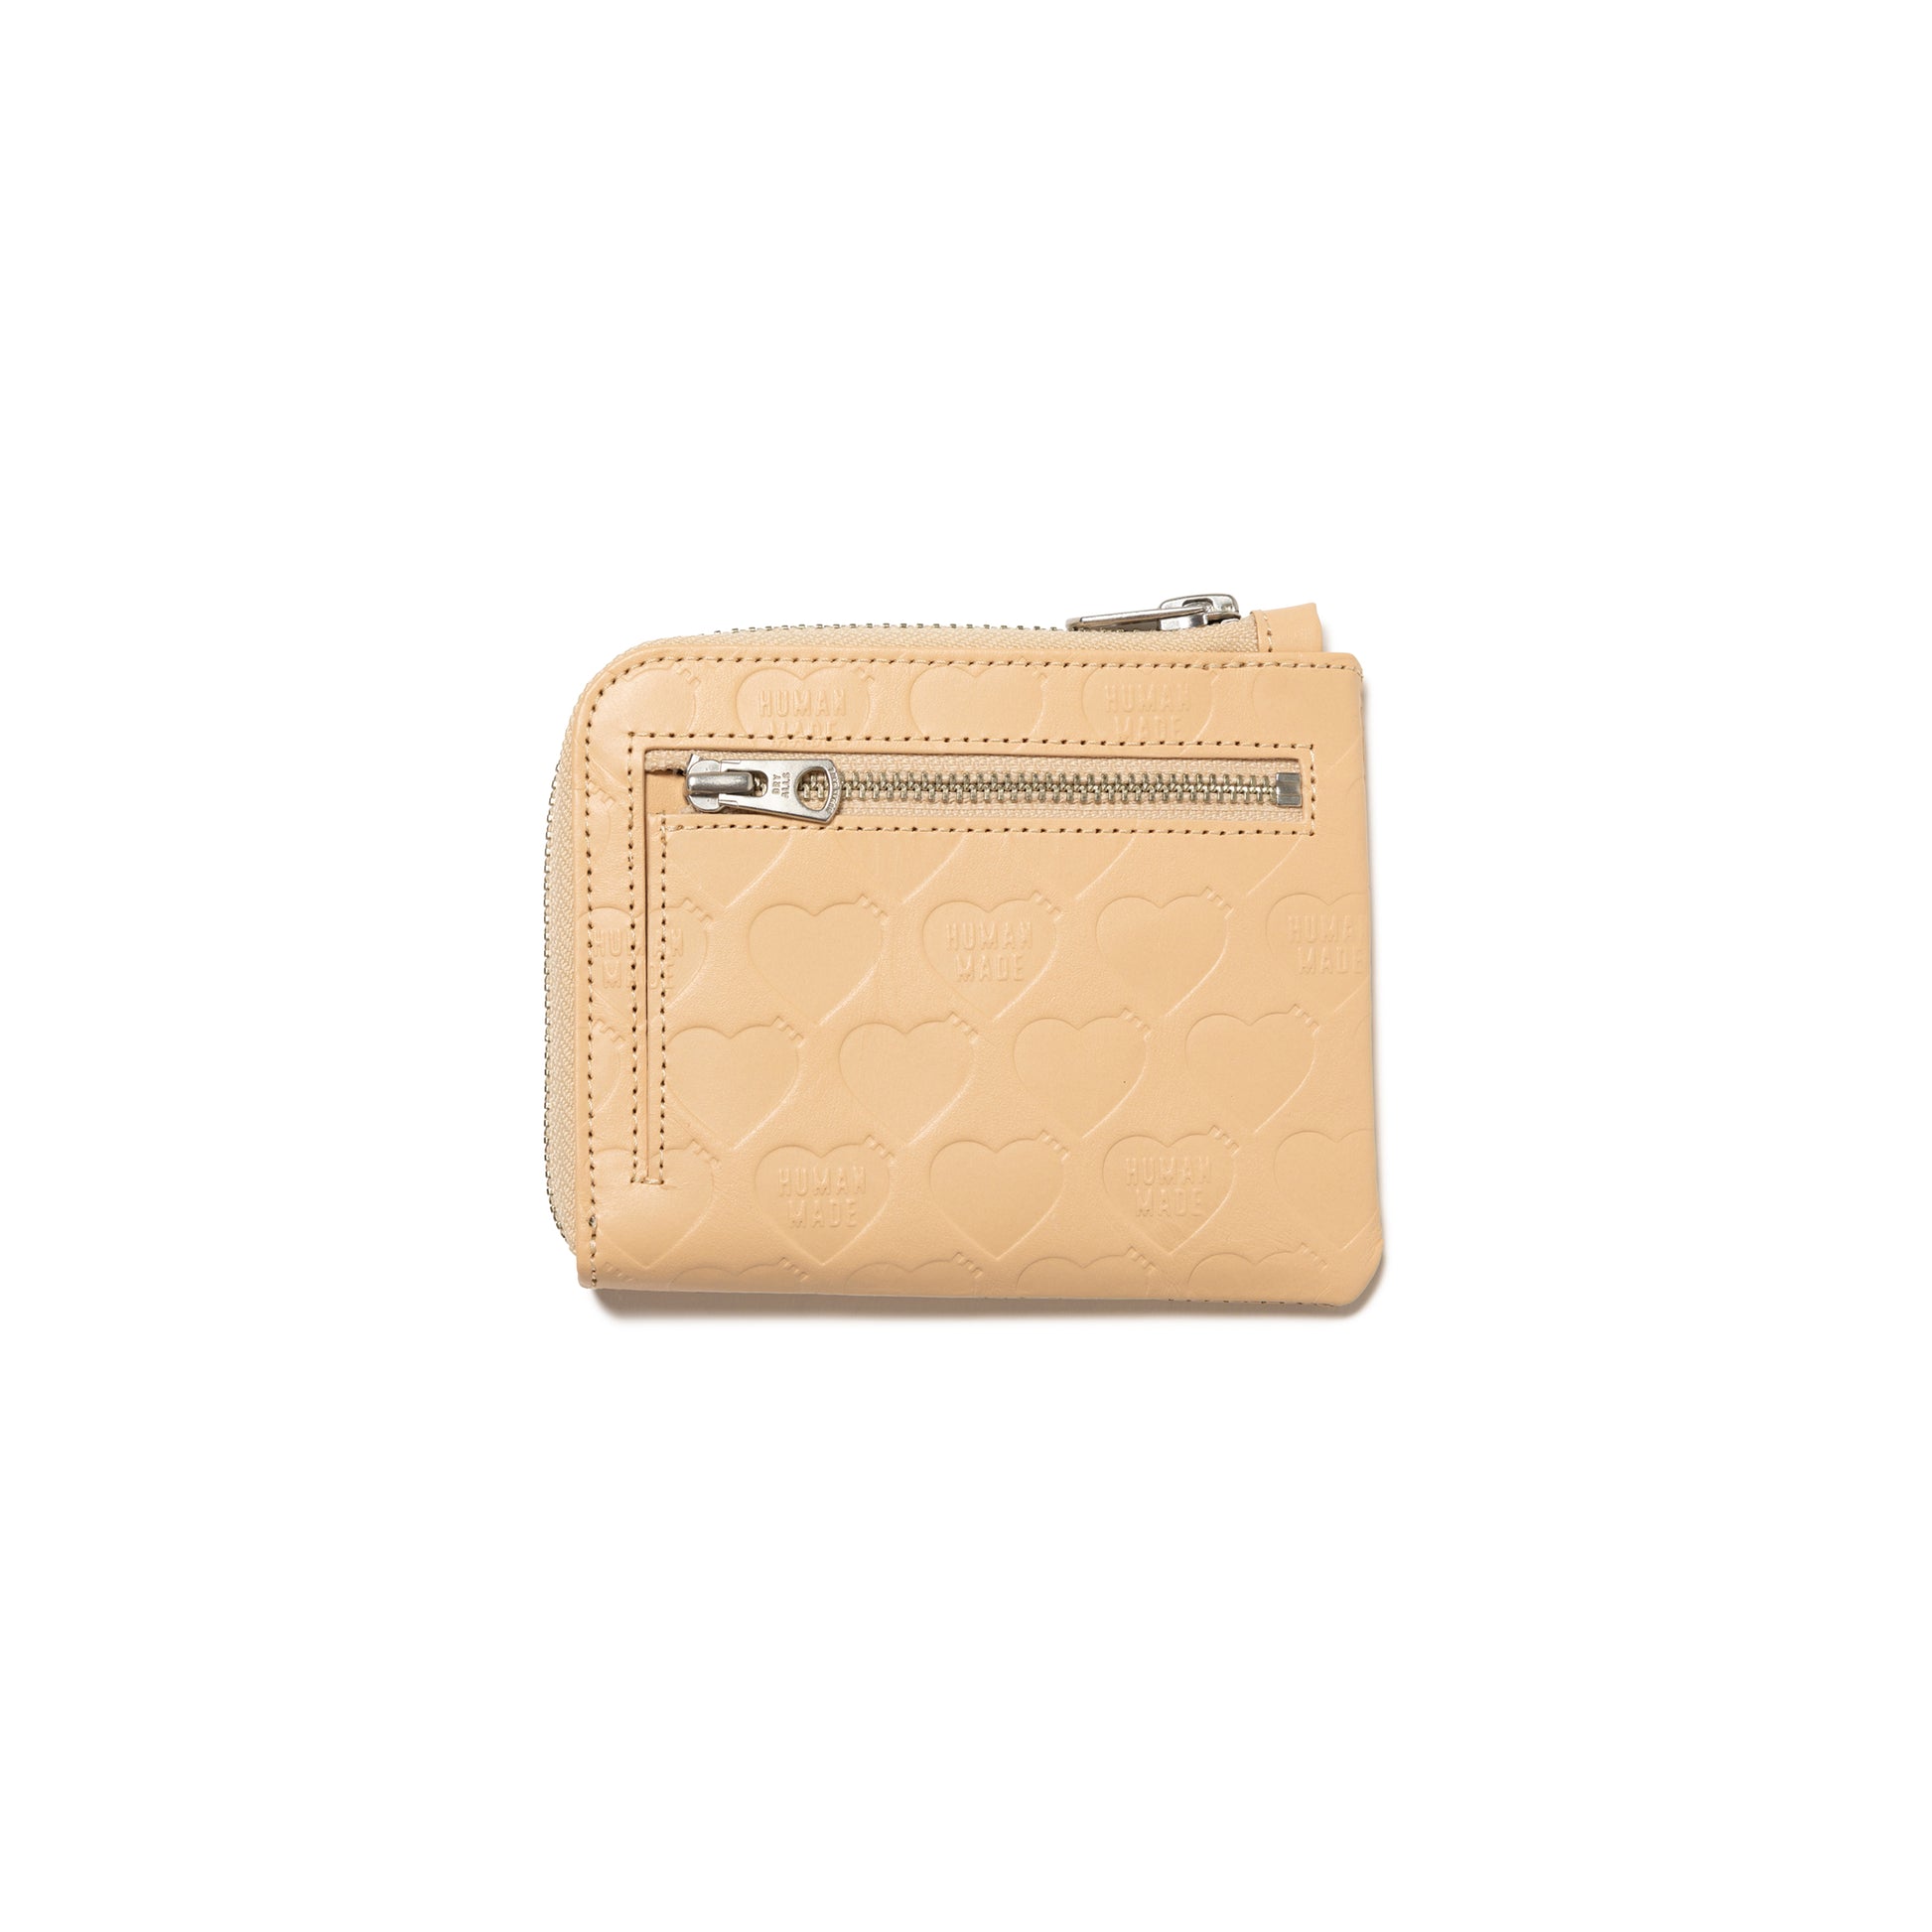 HUMAN MADE LEATHER WALLET BEIGE WALLET - 折り財布